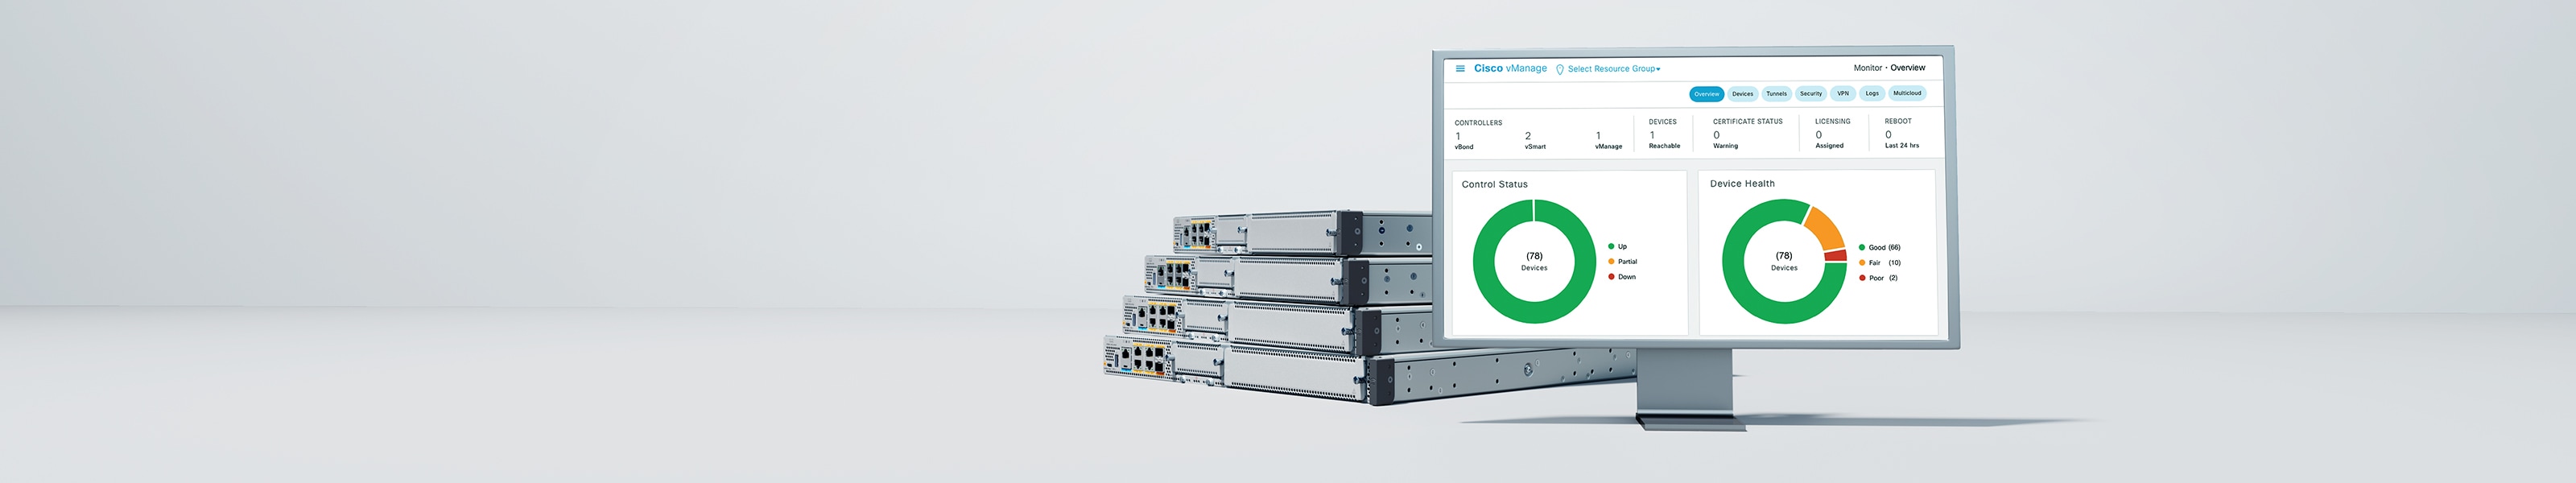 Cisco Catalyst 8300 Series Edge Platforms and Cisco Catalyst SD-WAN Manager dashboard